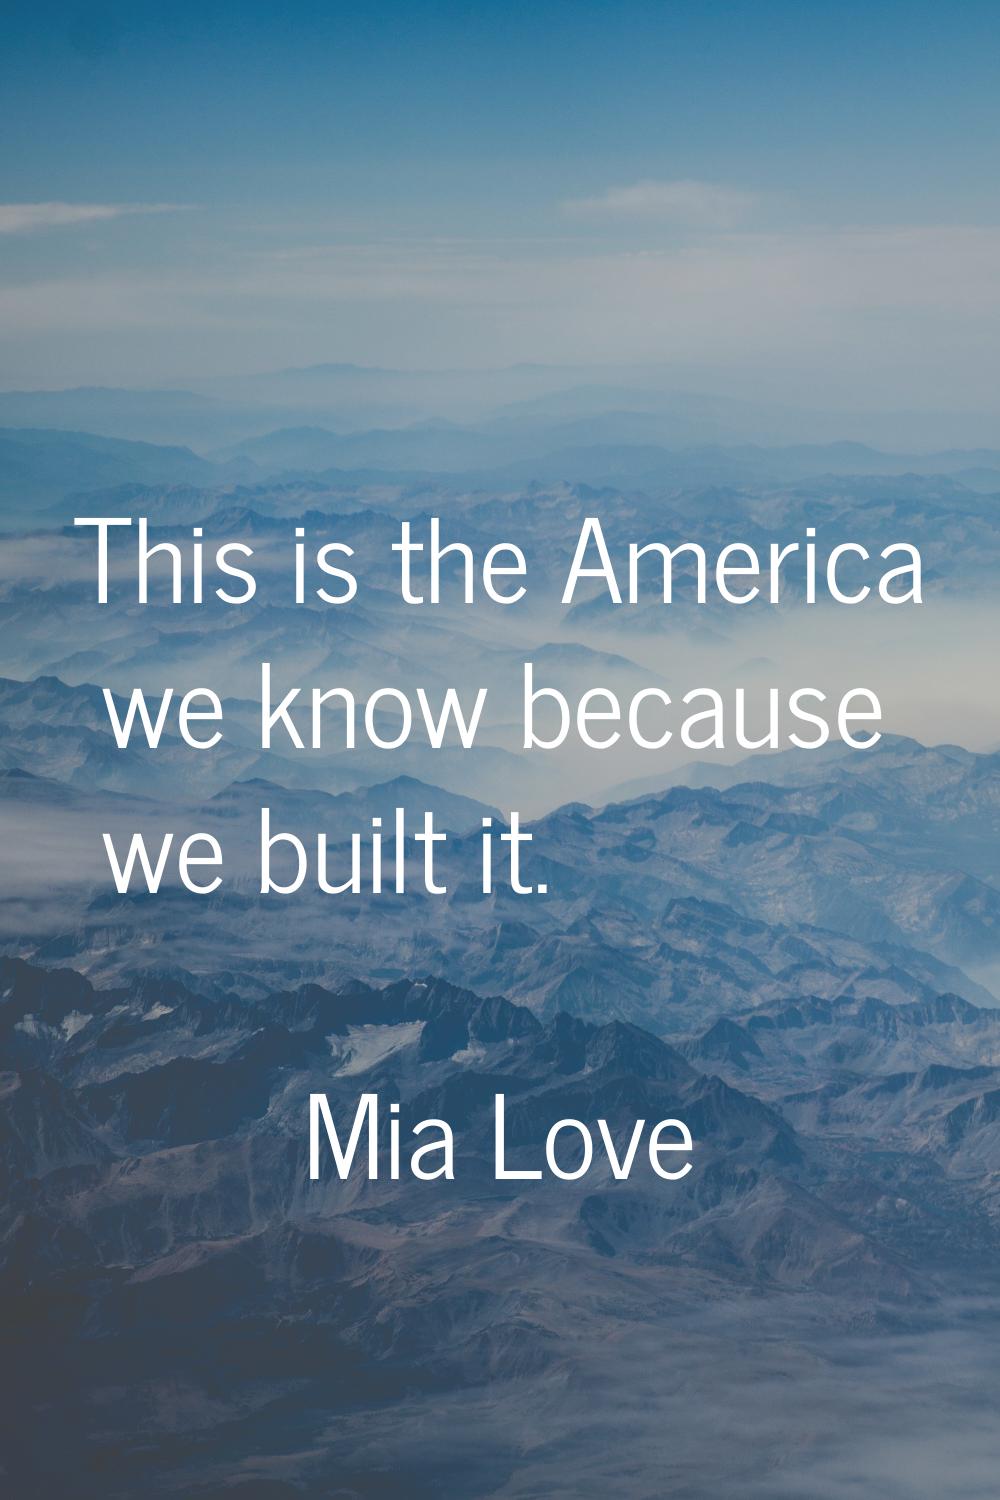 This is the America we know because we built it.